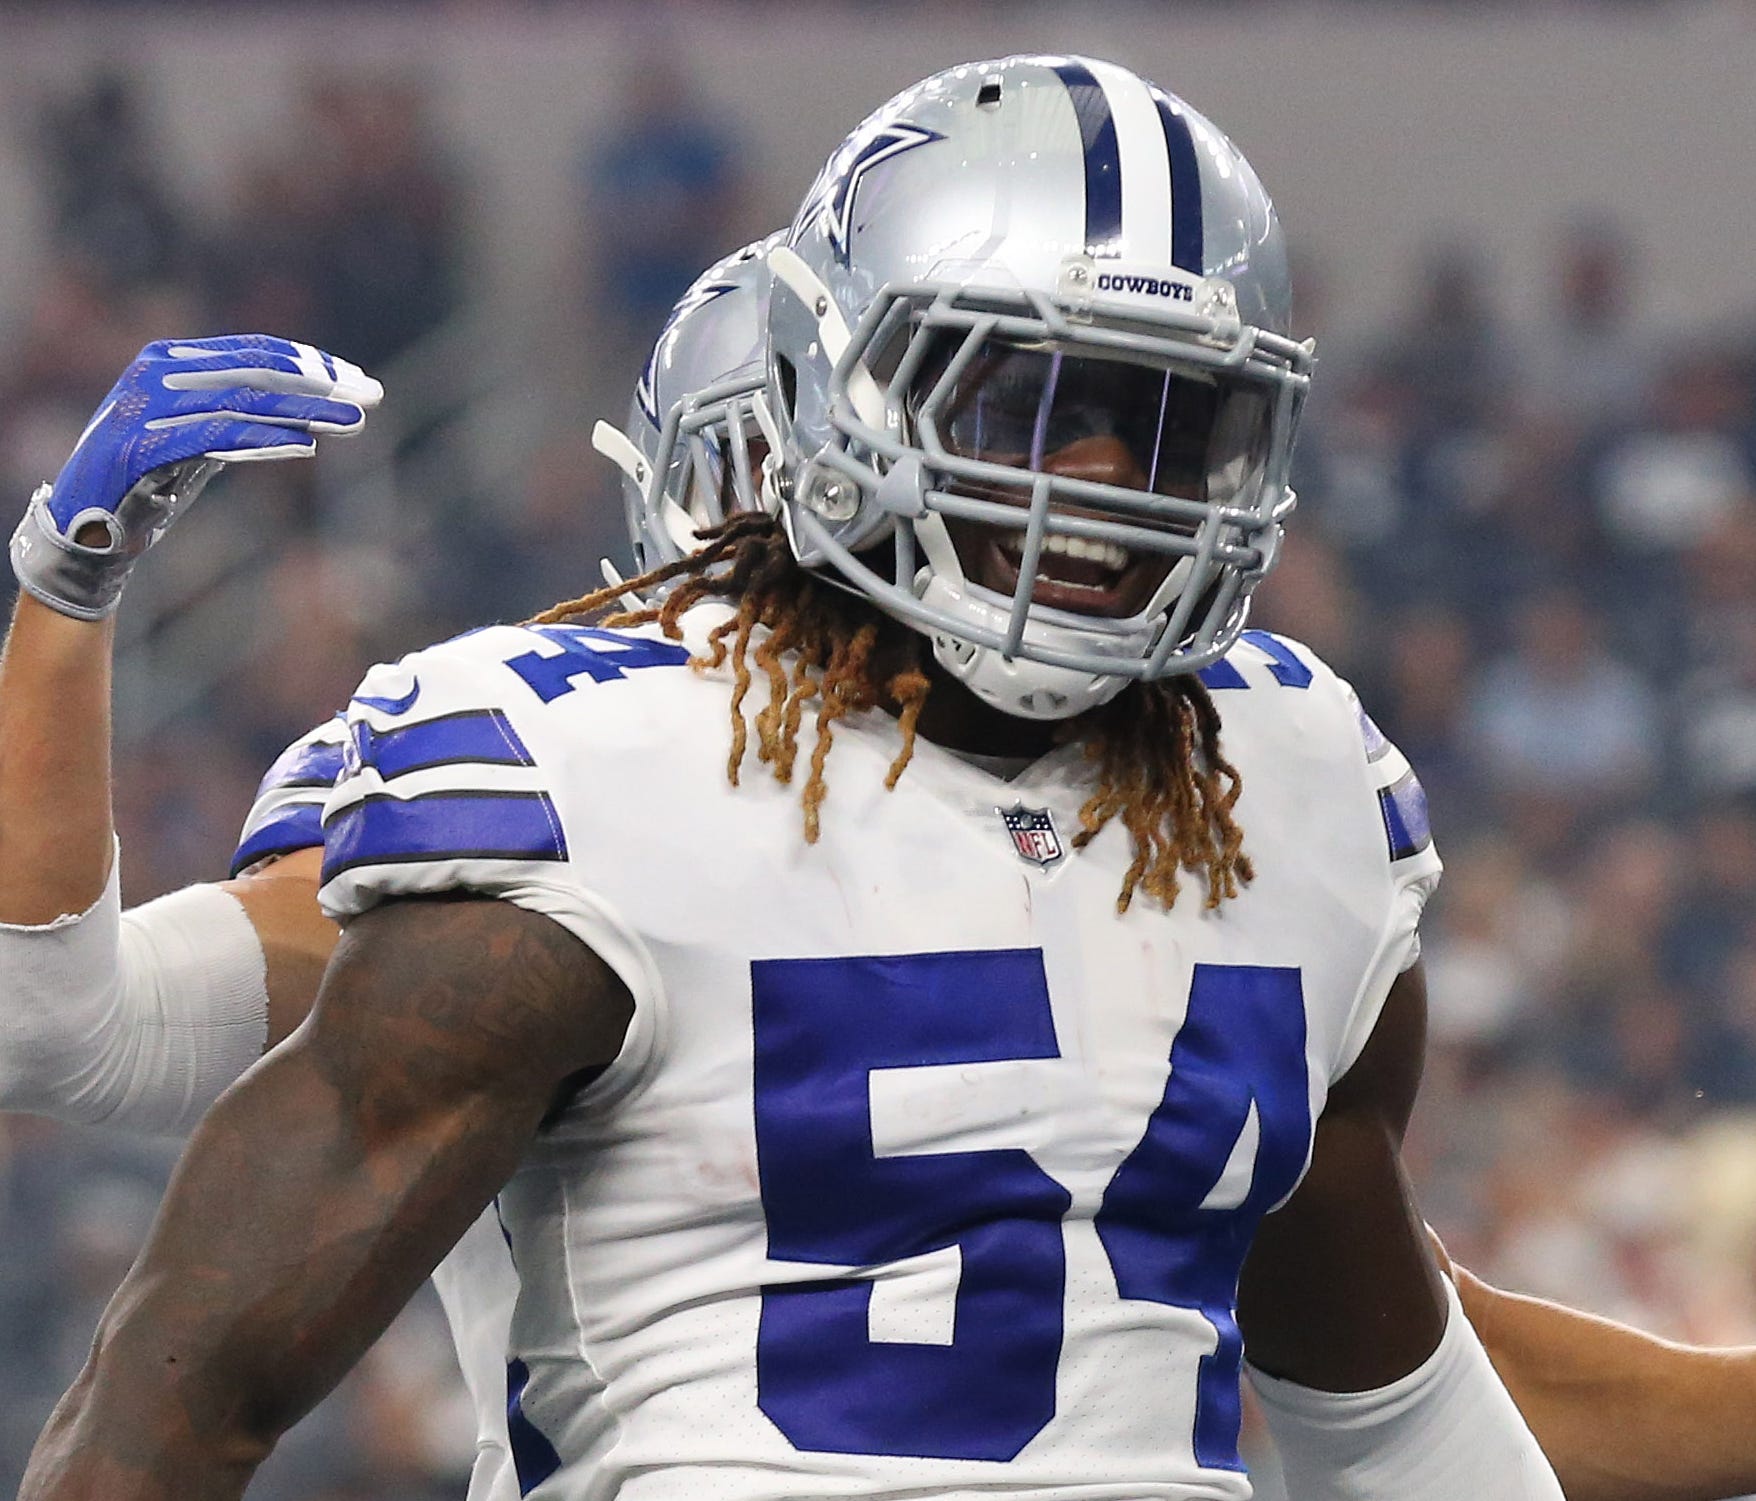 Cowboys LB Jaylon Smith made one tackle in his first NFL action Saturday.